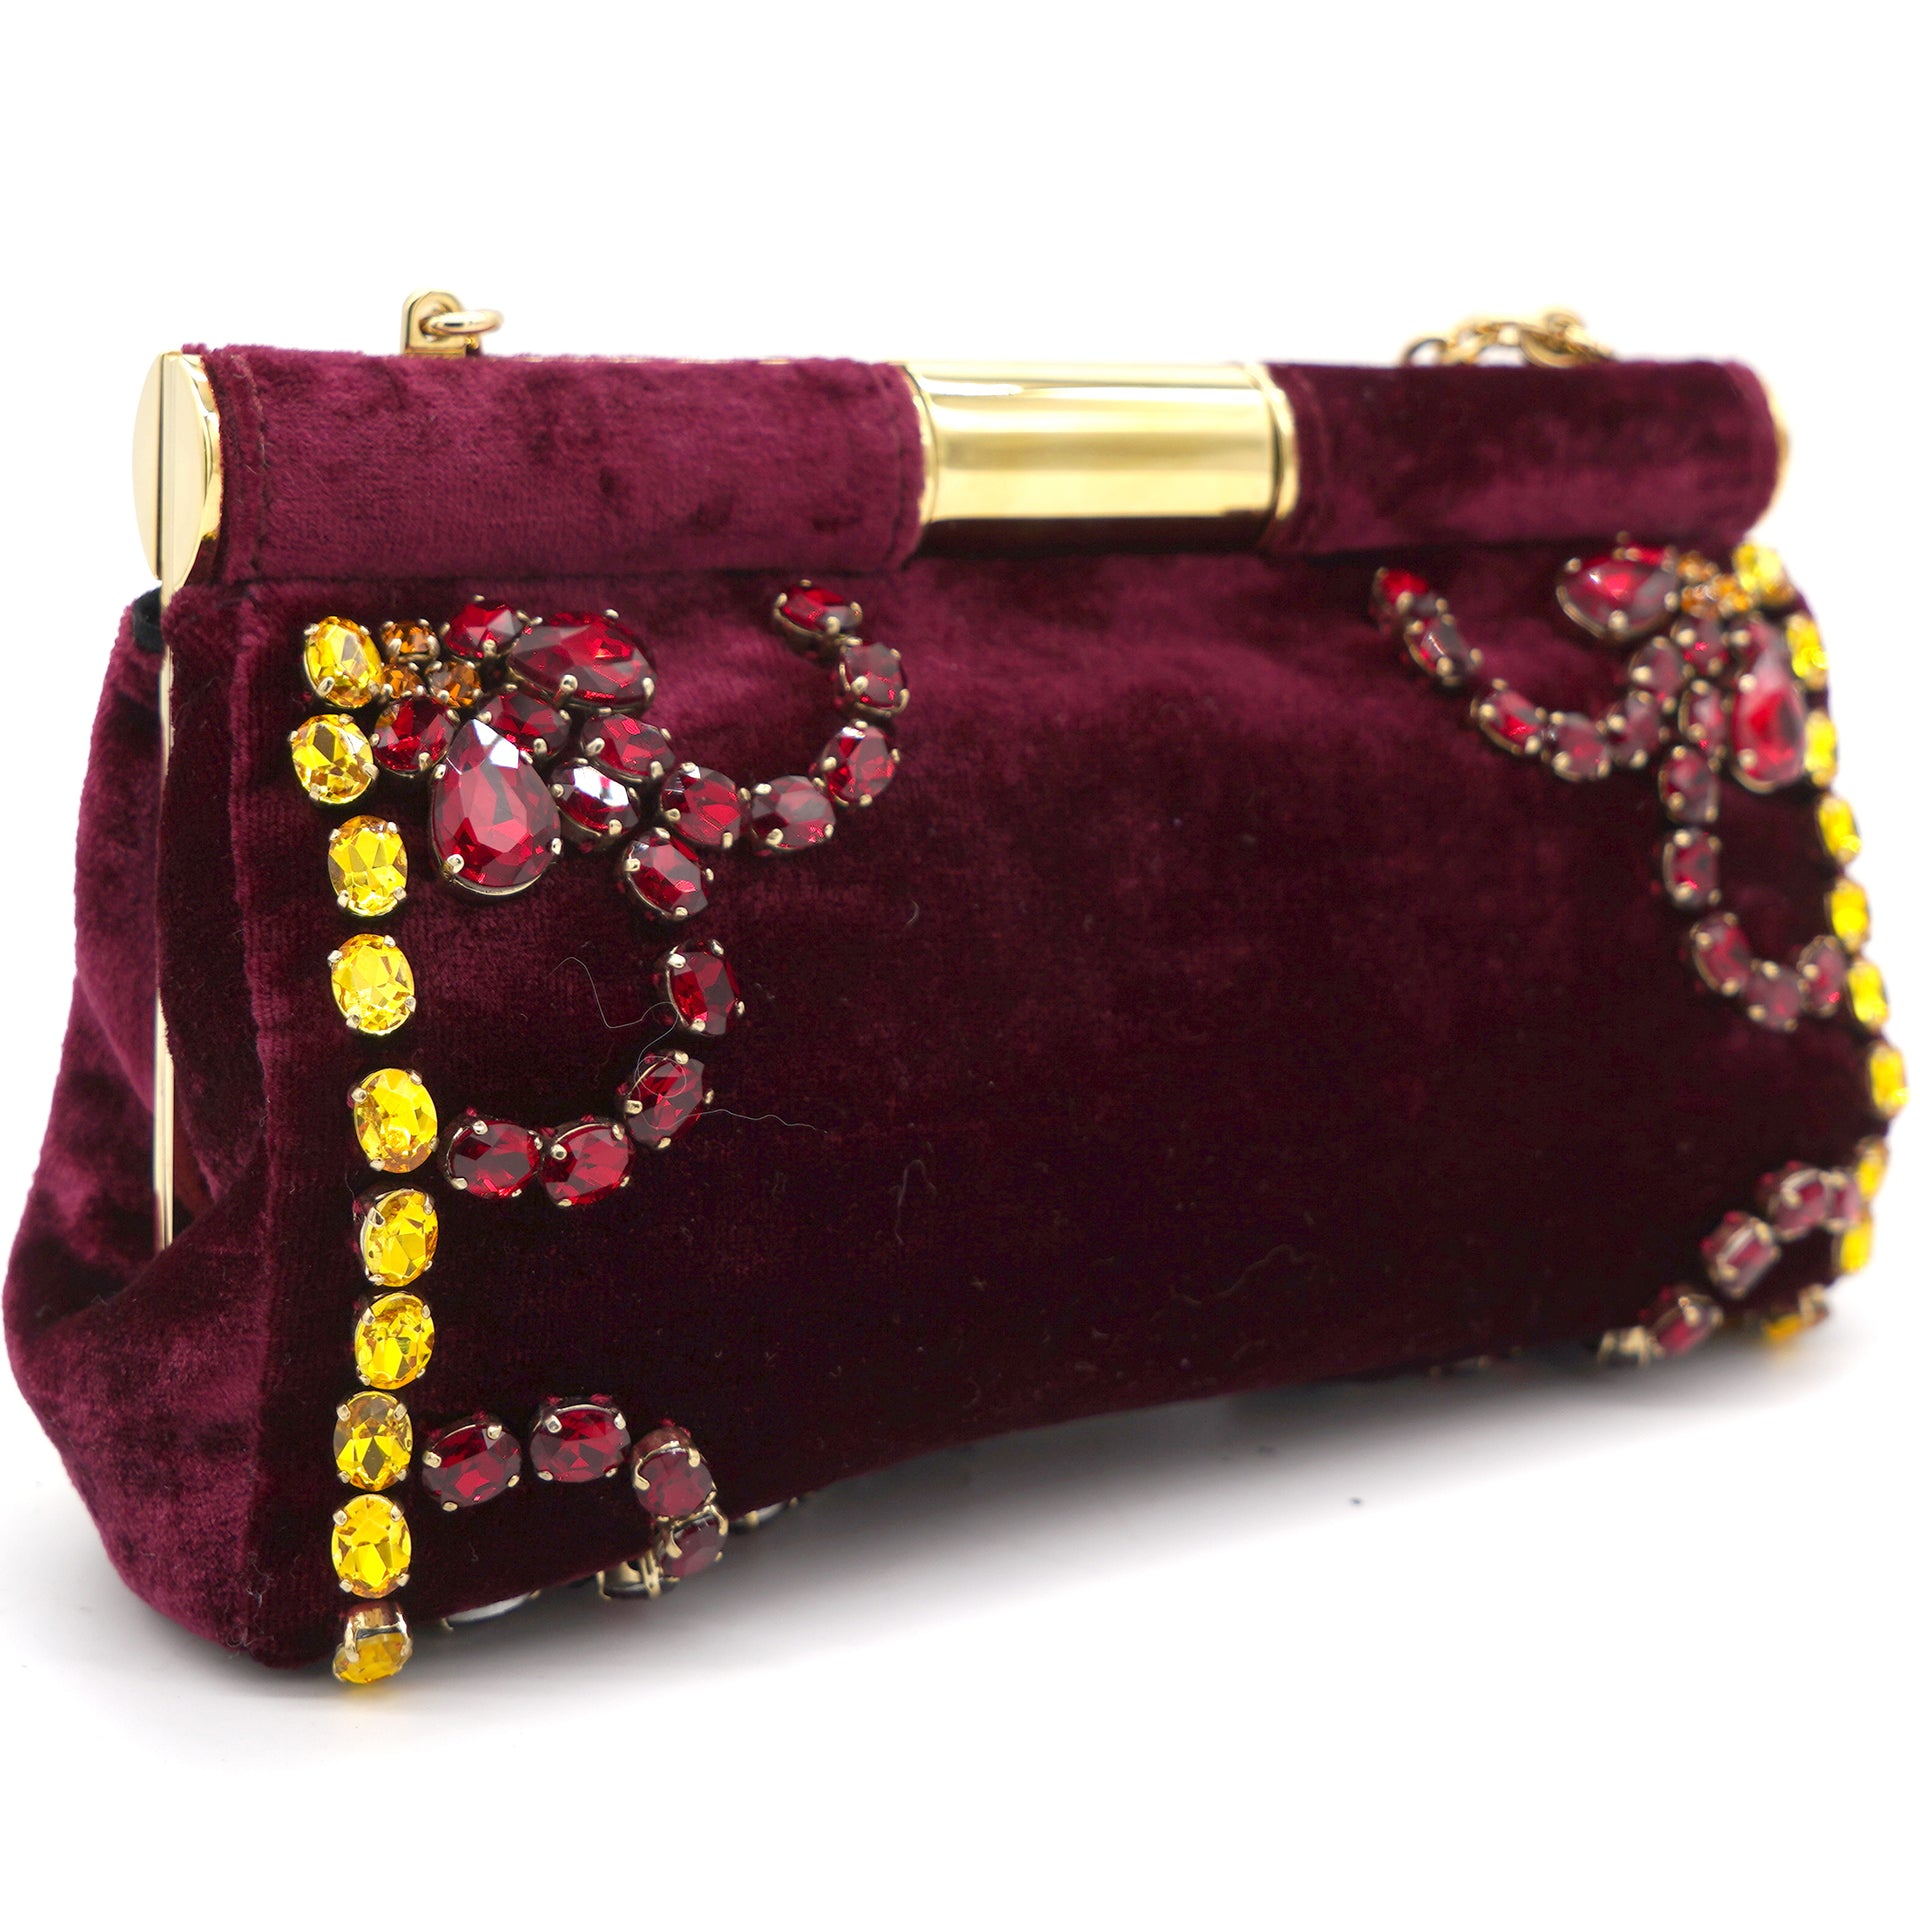 Embroidered evening bag, maroon velvet purse, Zardozi purse, Zardozi  clutch, Zardozi evening bag, India embroidered clutch, gifts for her